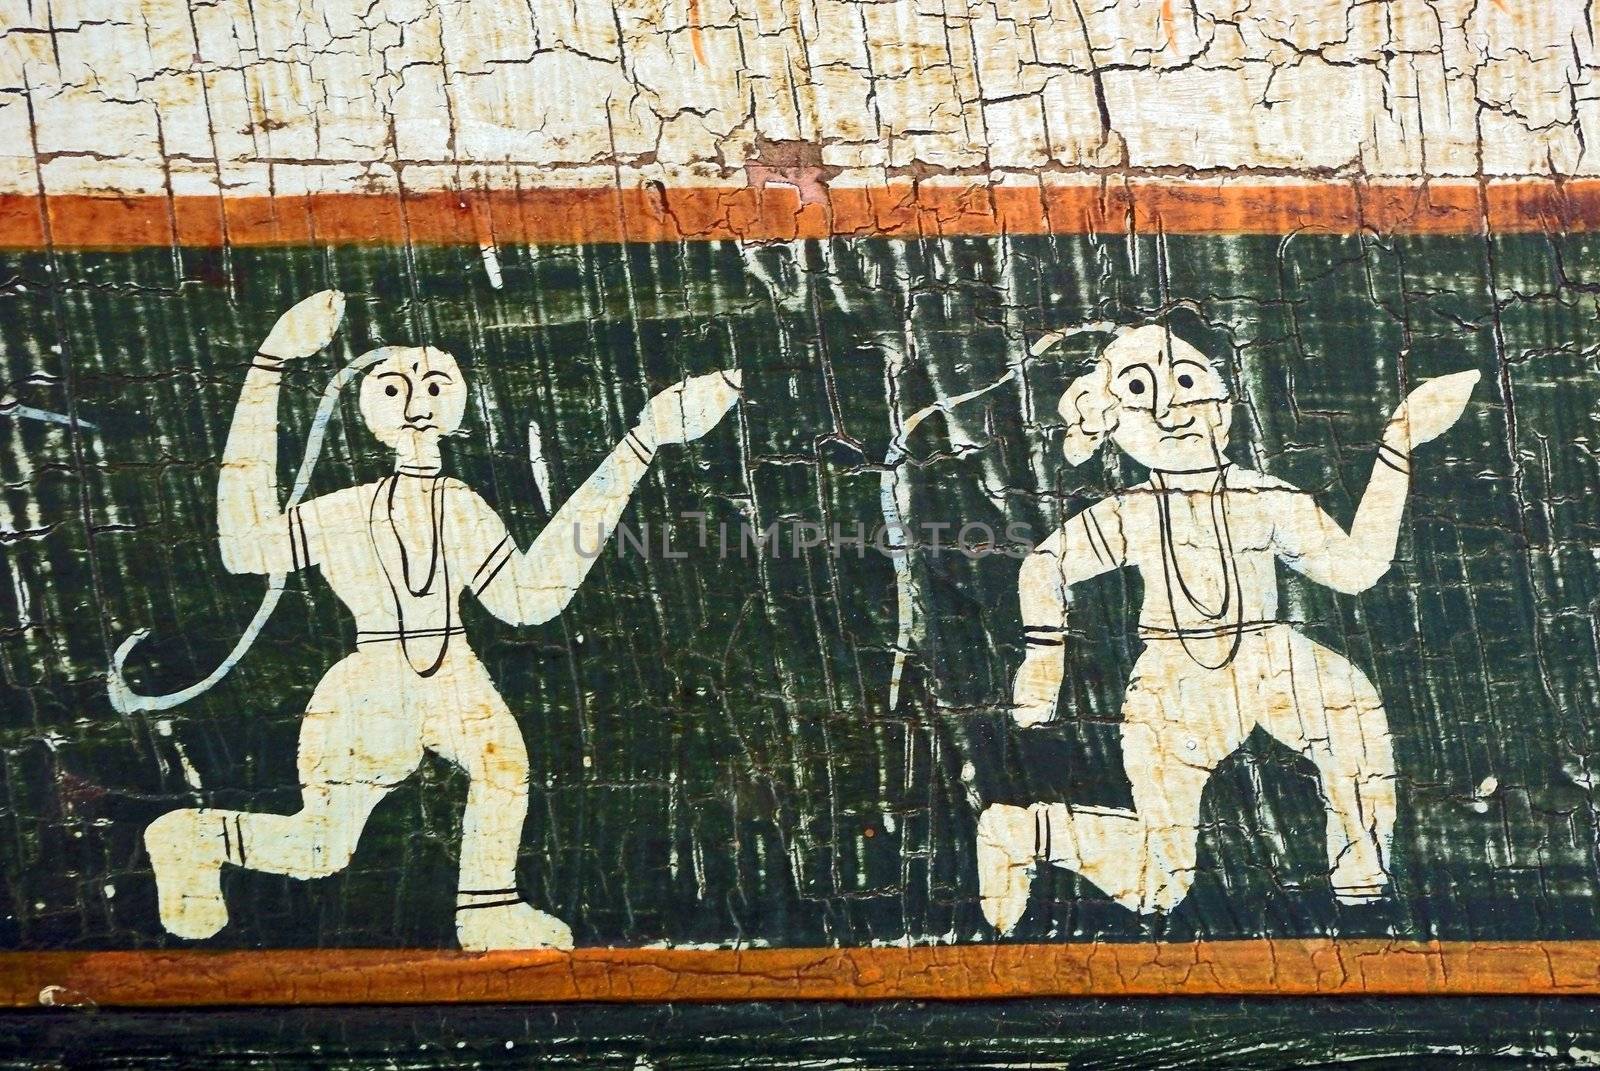 Dancing figures on an aged background. by Vitamin